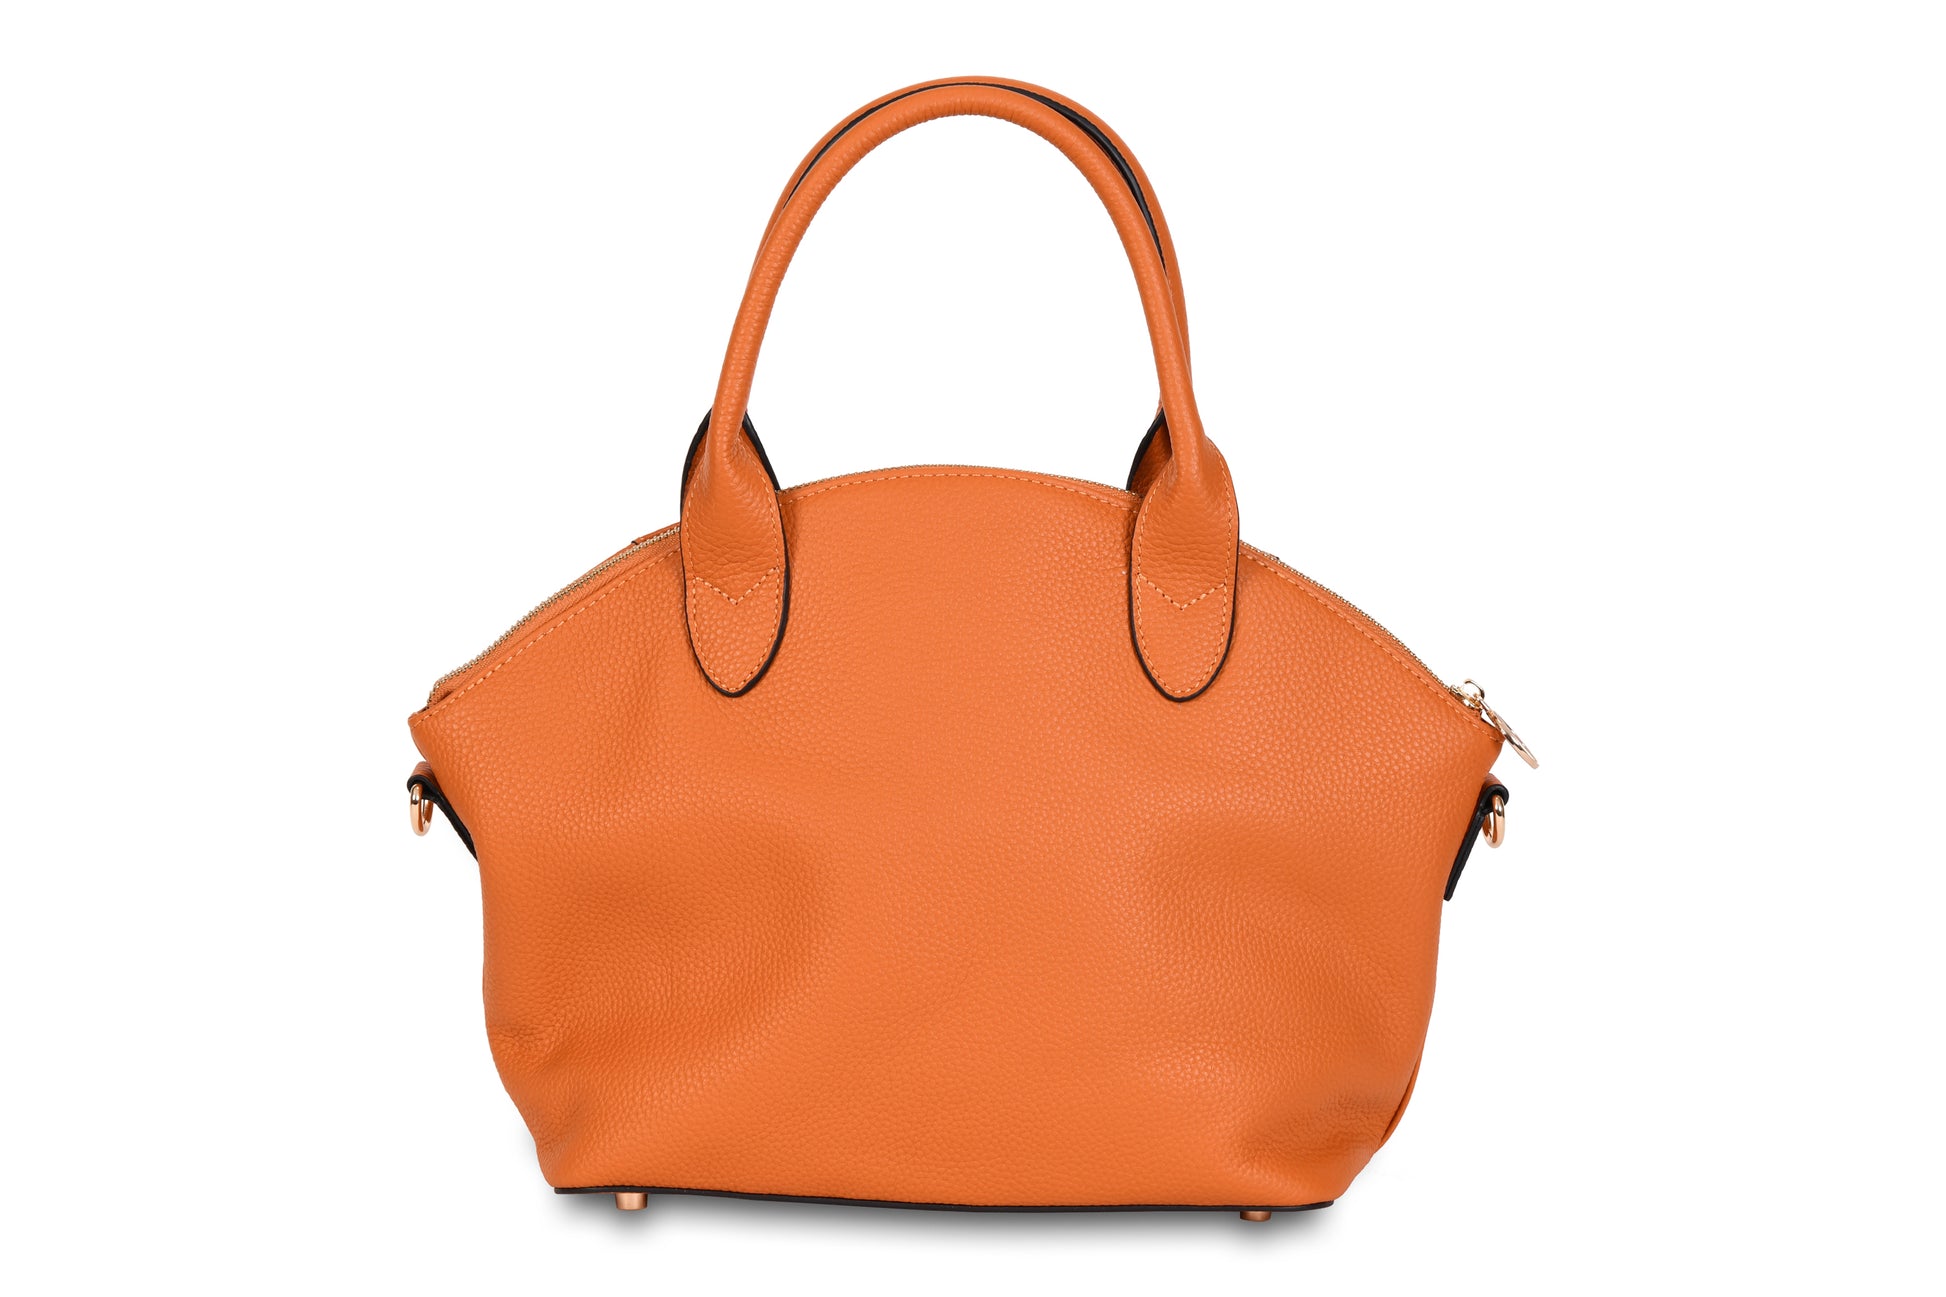 Bali Pebble Grain Leather Orange Sunset Handbag made by Dewi Maya back view available at the best boutique in Upstate South Carolina Spartanburg Greenville Dewi Maya Boutique